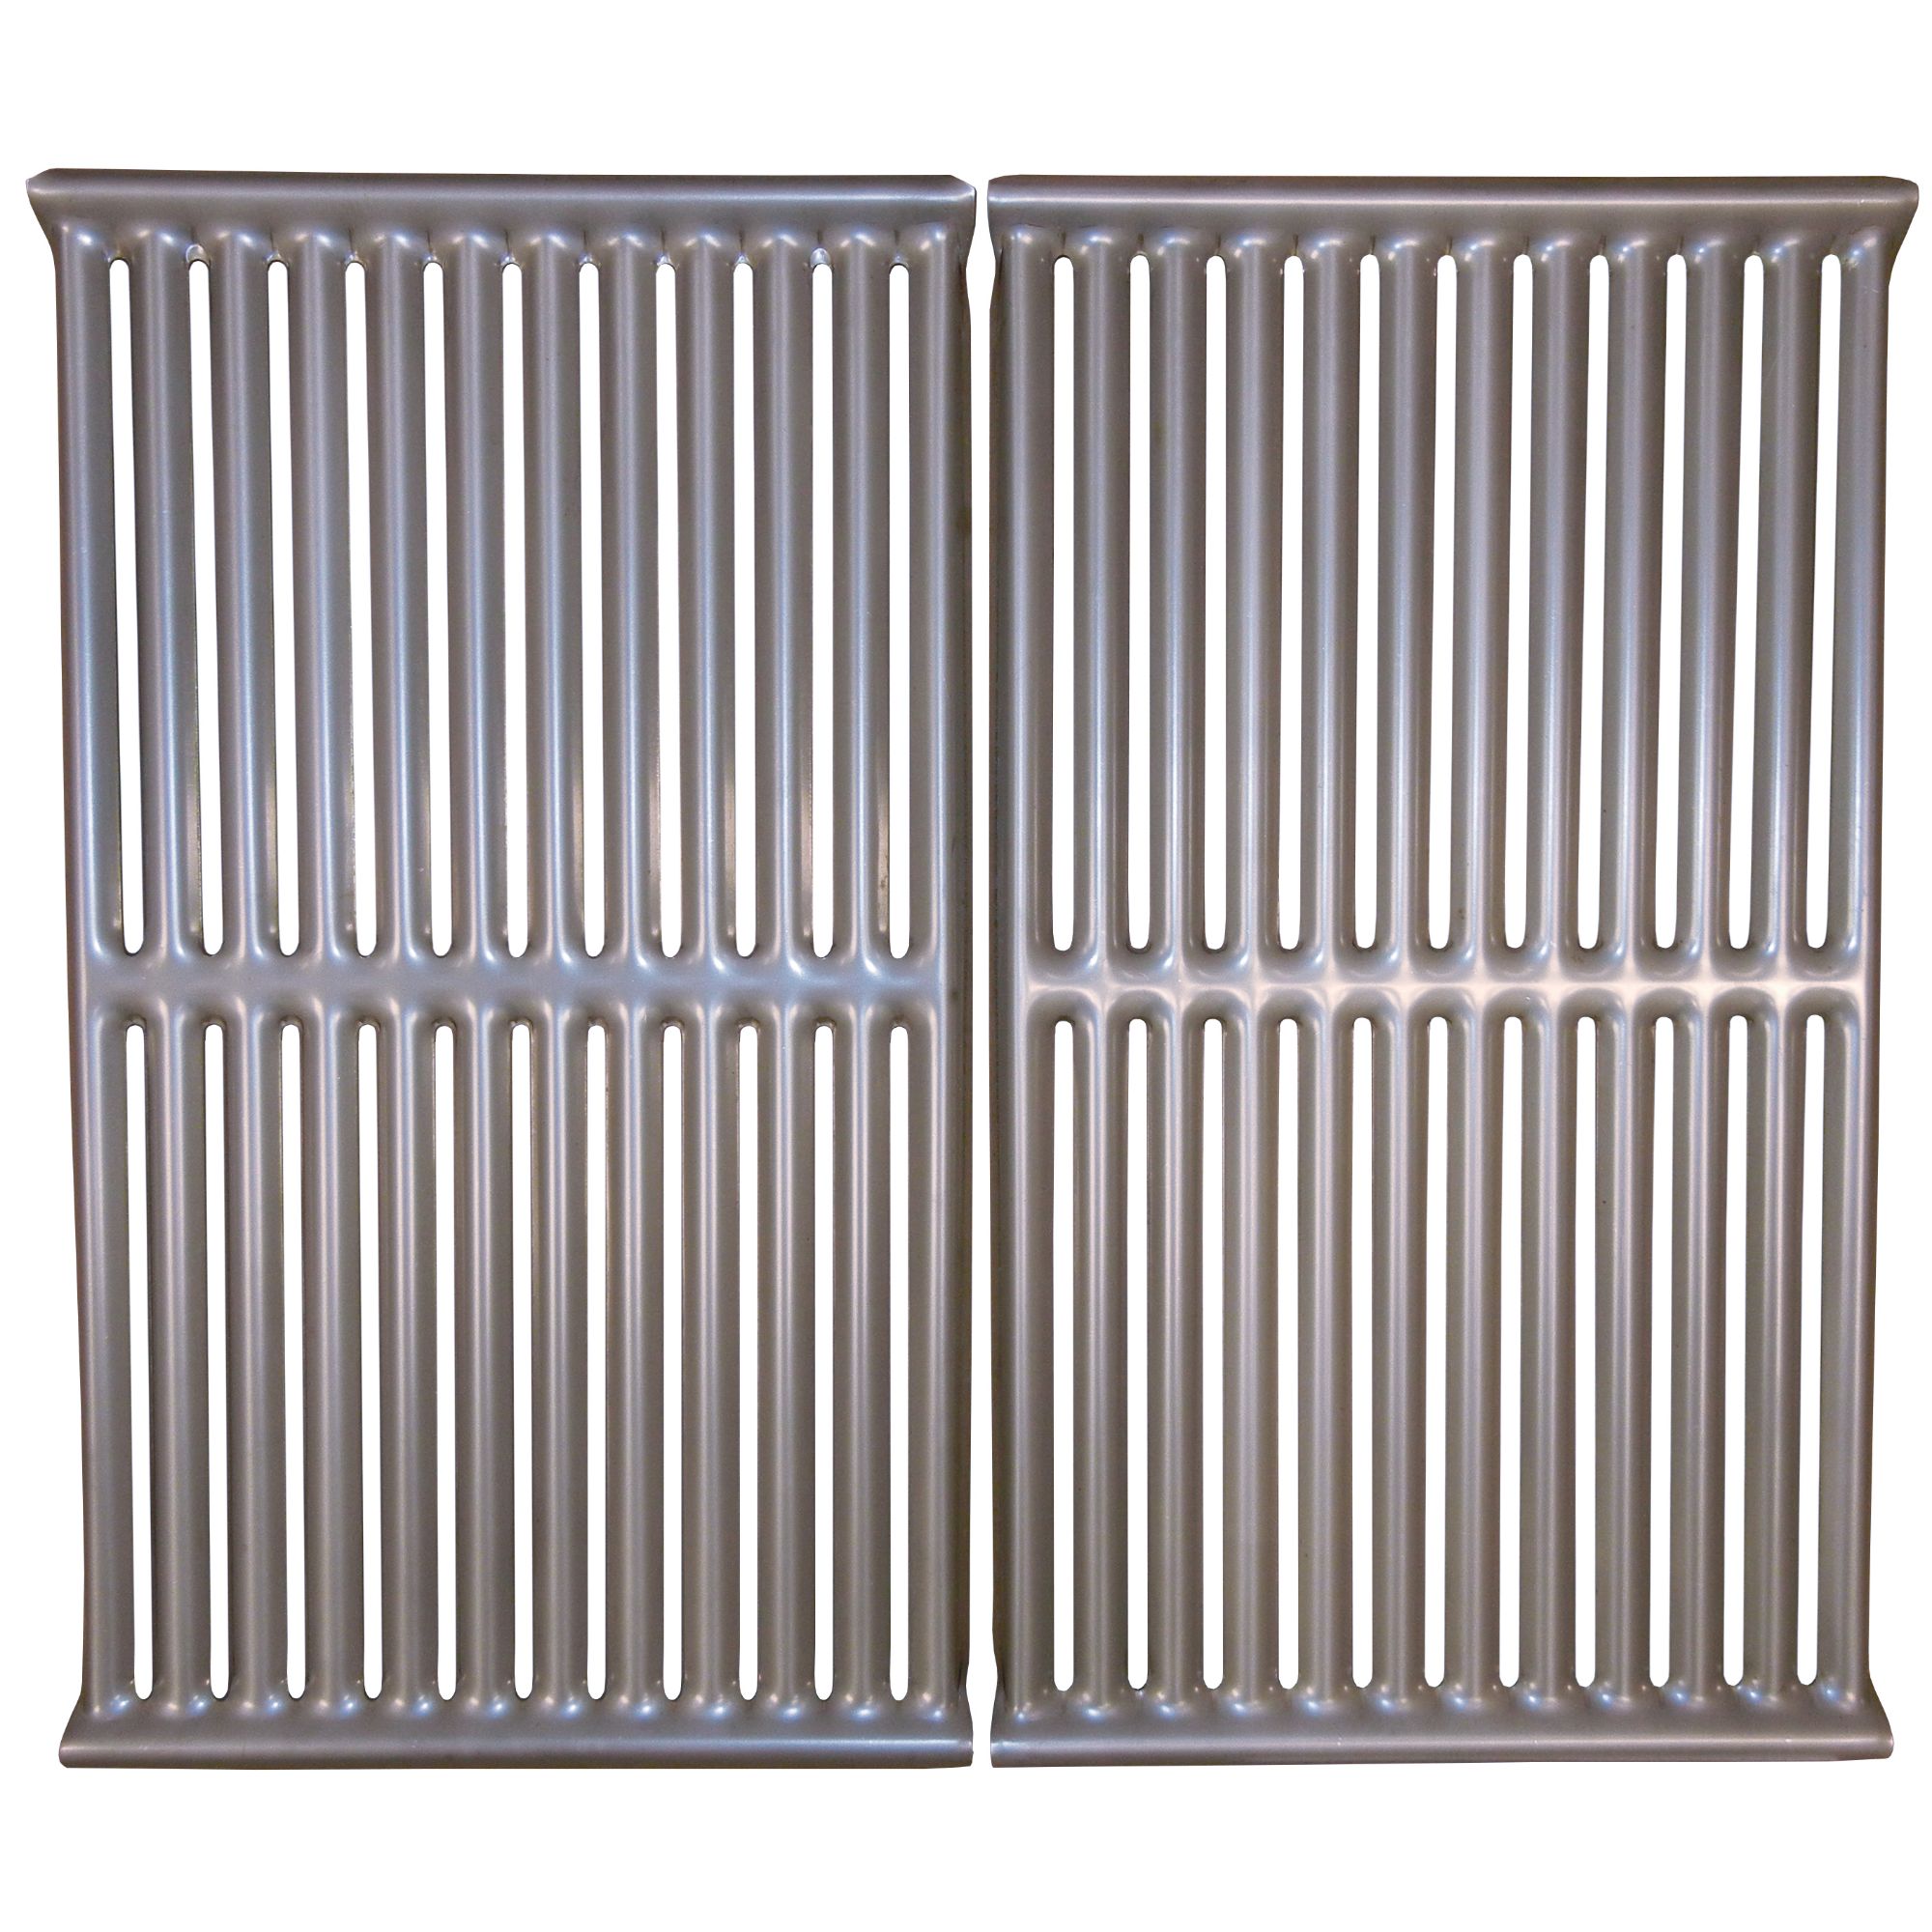 Stamped stainless steel cooking grid for Ducane brand gas grills